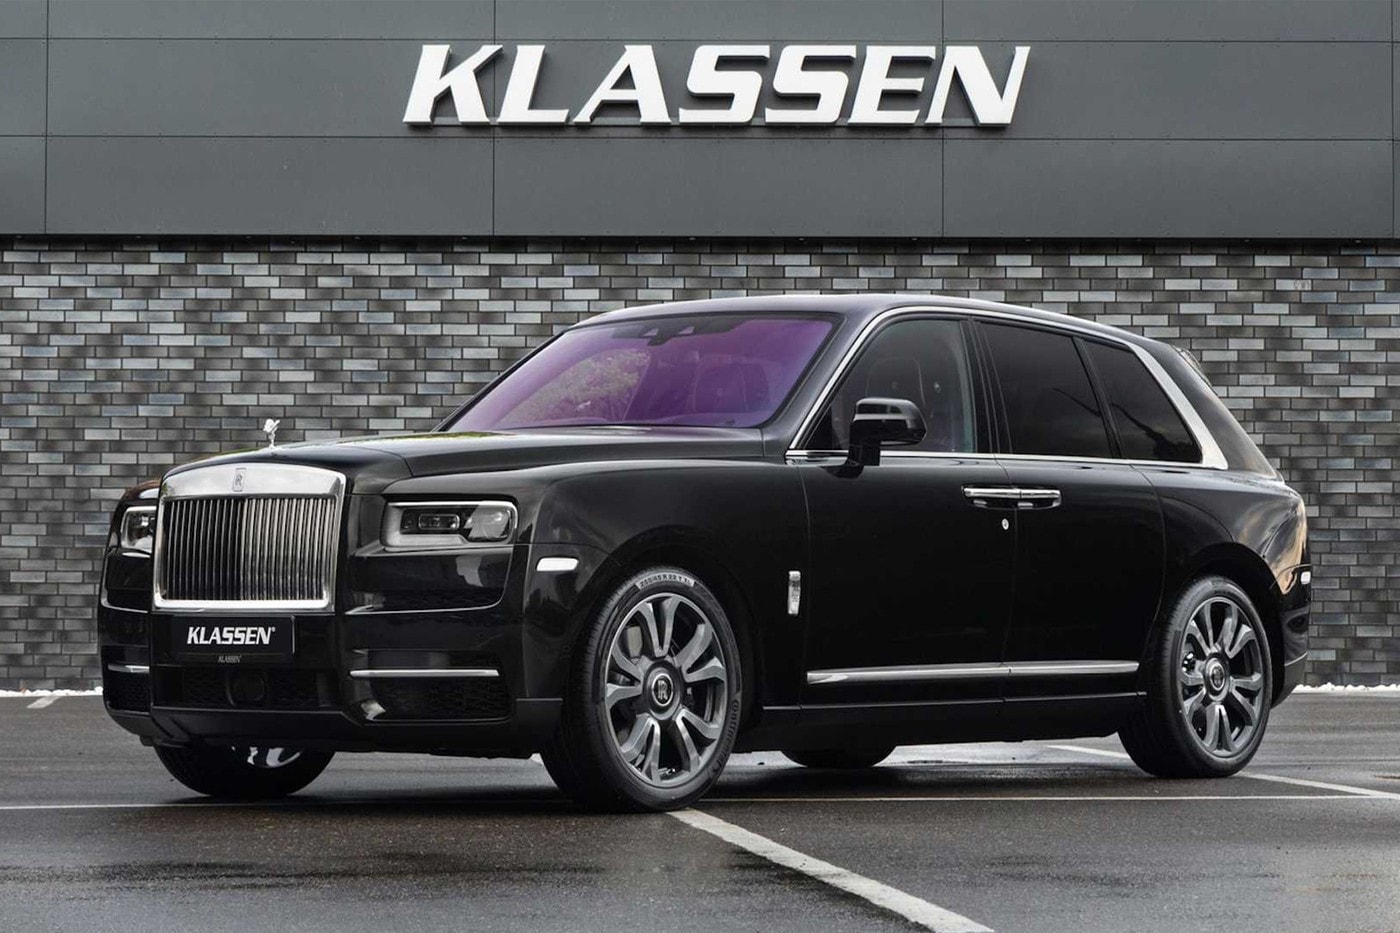 Rolls-Royce Black Badge Cullinan SUV Pictures, Specs, Details